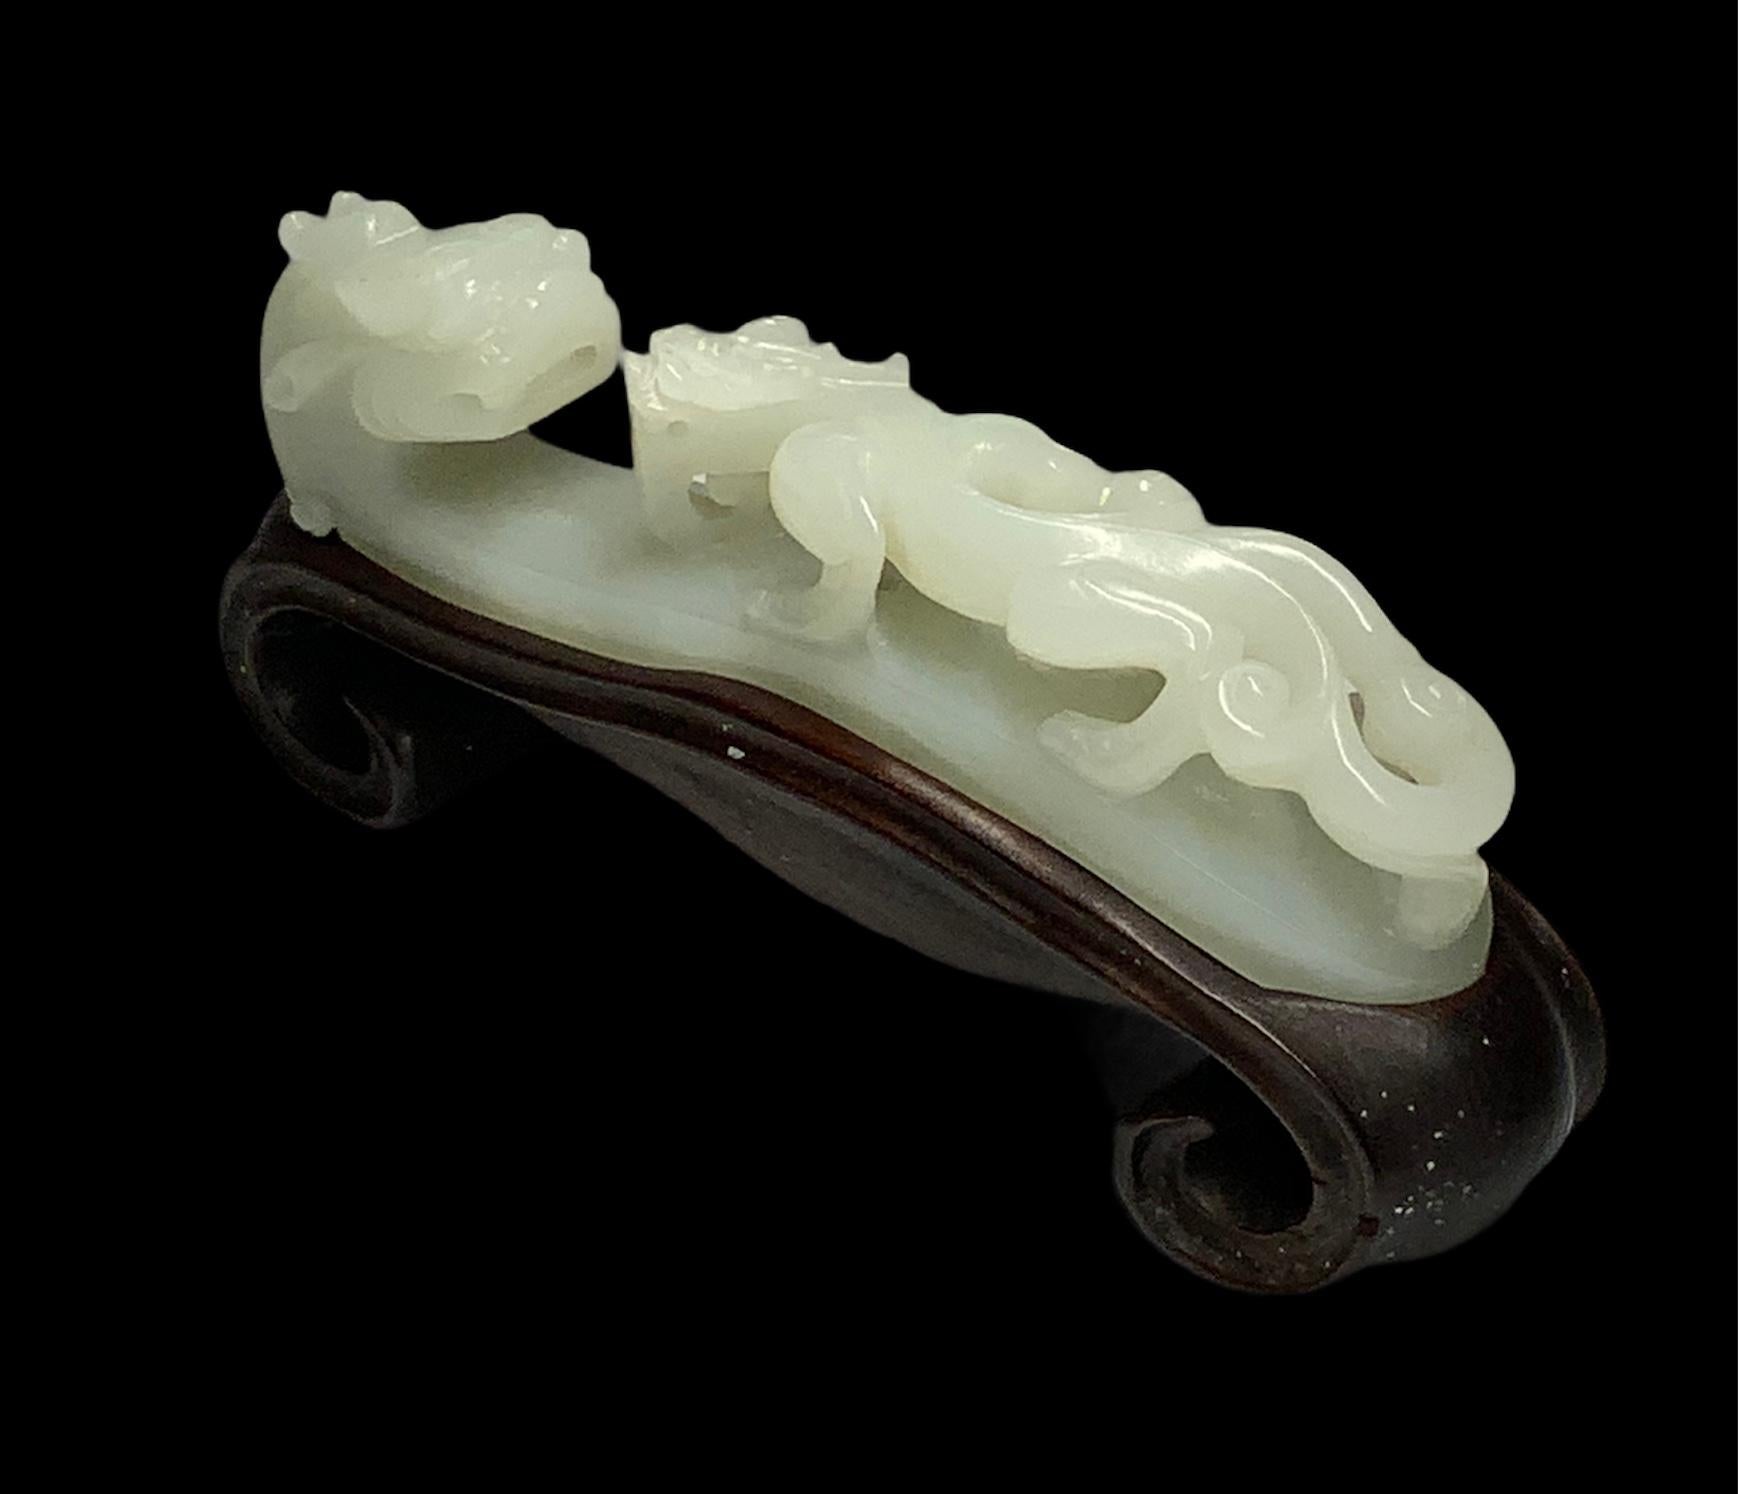 This is a Jade carving of a dragon head facing a leopard. This leopard is walking over the body of the dragon. Both figures stand over a chinese scroll wood base. In Chinese culture the leopard symbolizes the taming of cruelty. The dragon symbolizes